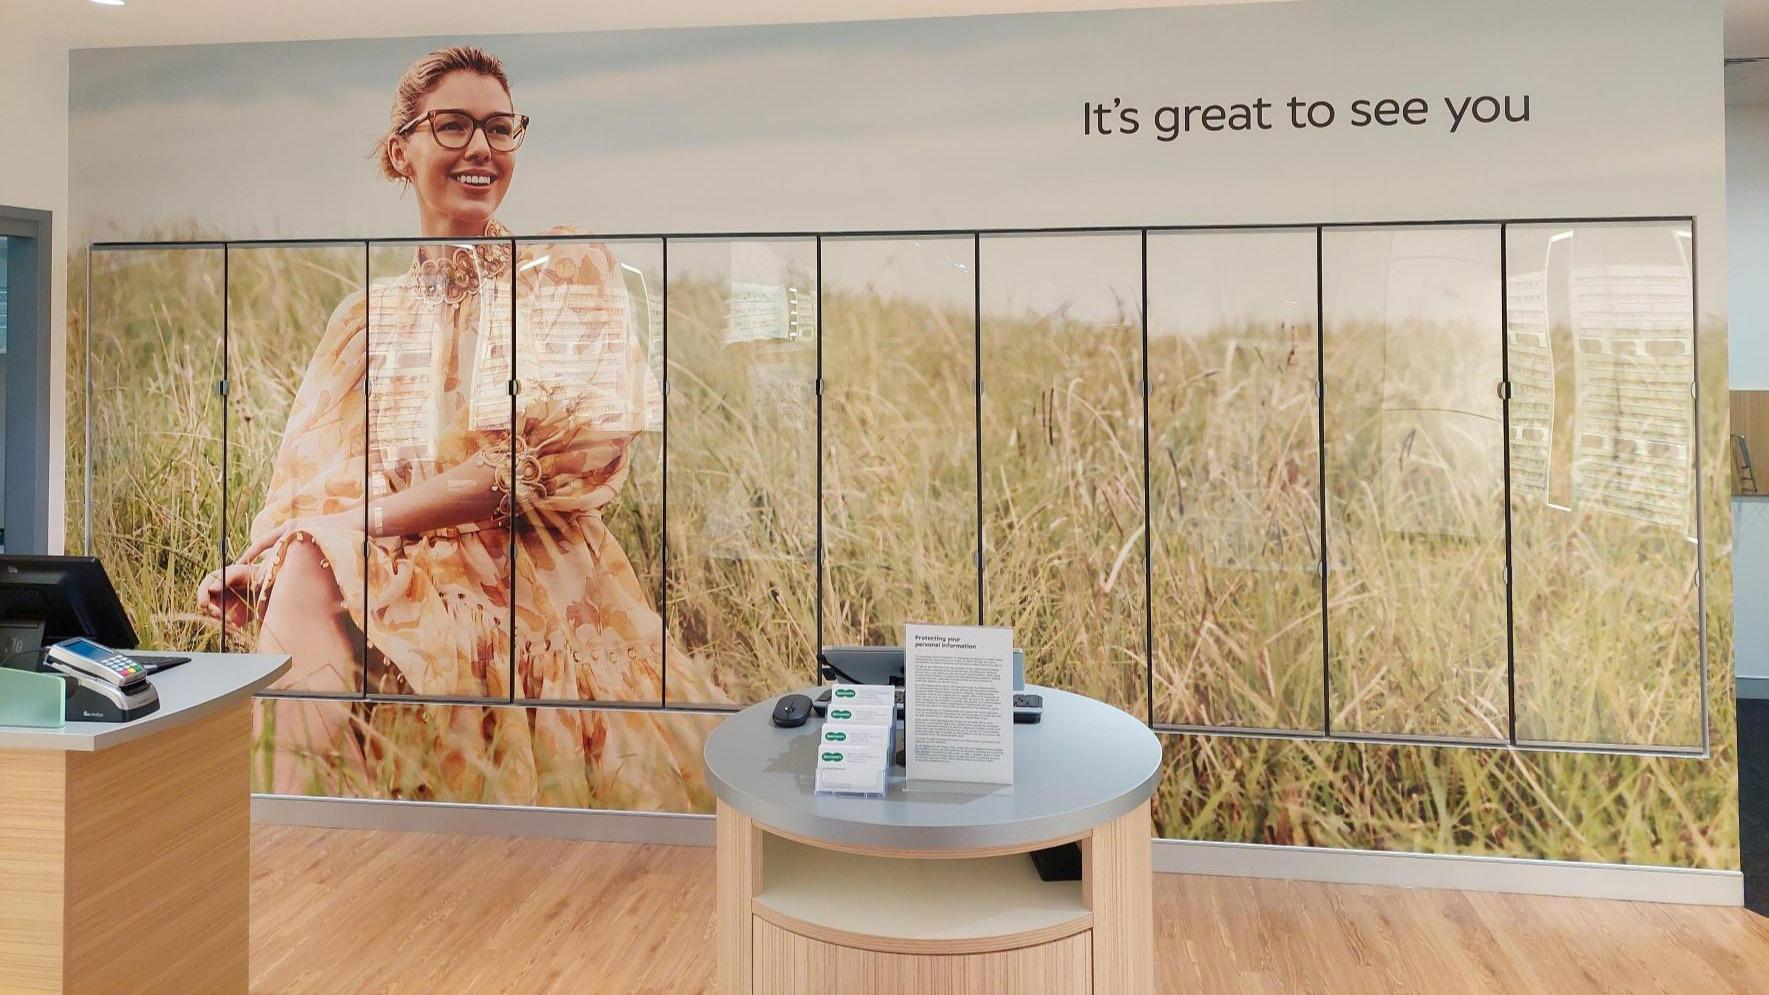 Images Specsavers Optometrists - Springwood & Audiology